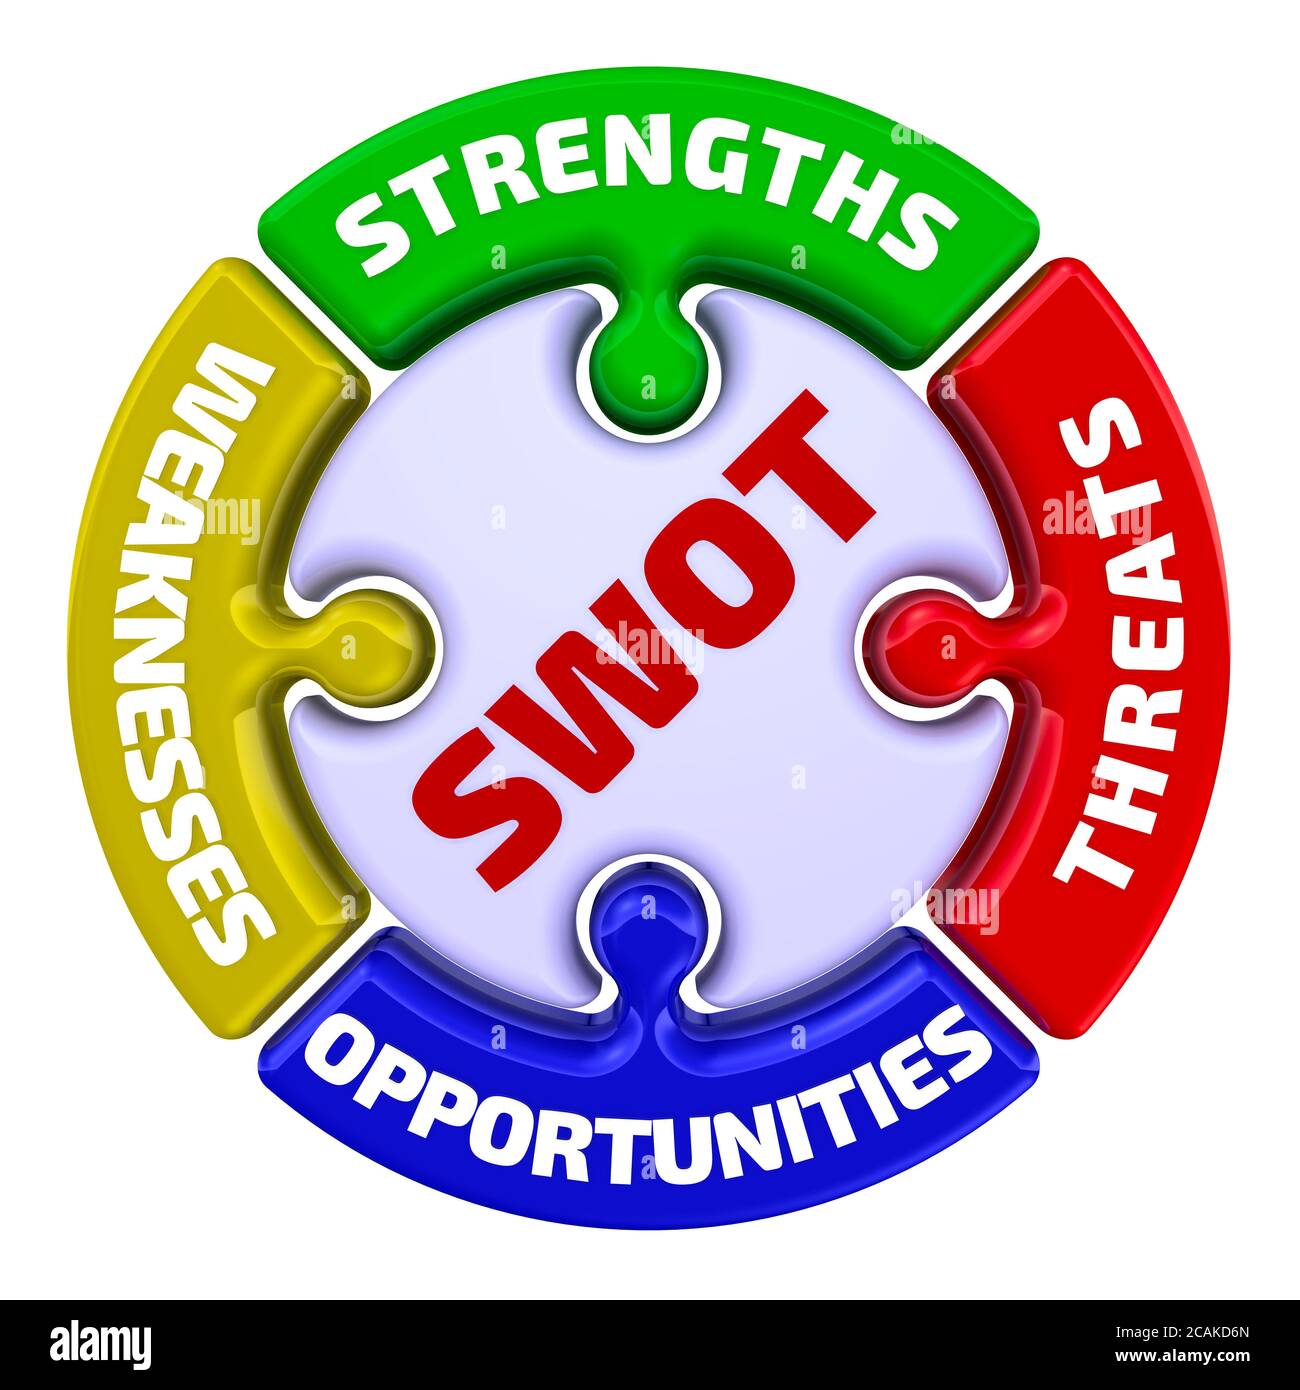 SWOT analysis - the inscription SWOT - Strengths, Weaknesses, Opportunities, Threats on the puzzle in the shape of a circle. 3D Illustration. Isolated Stock Photo